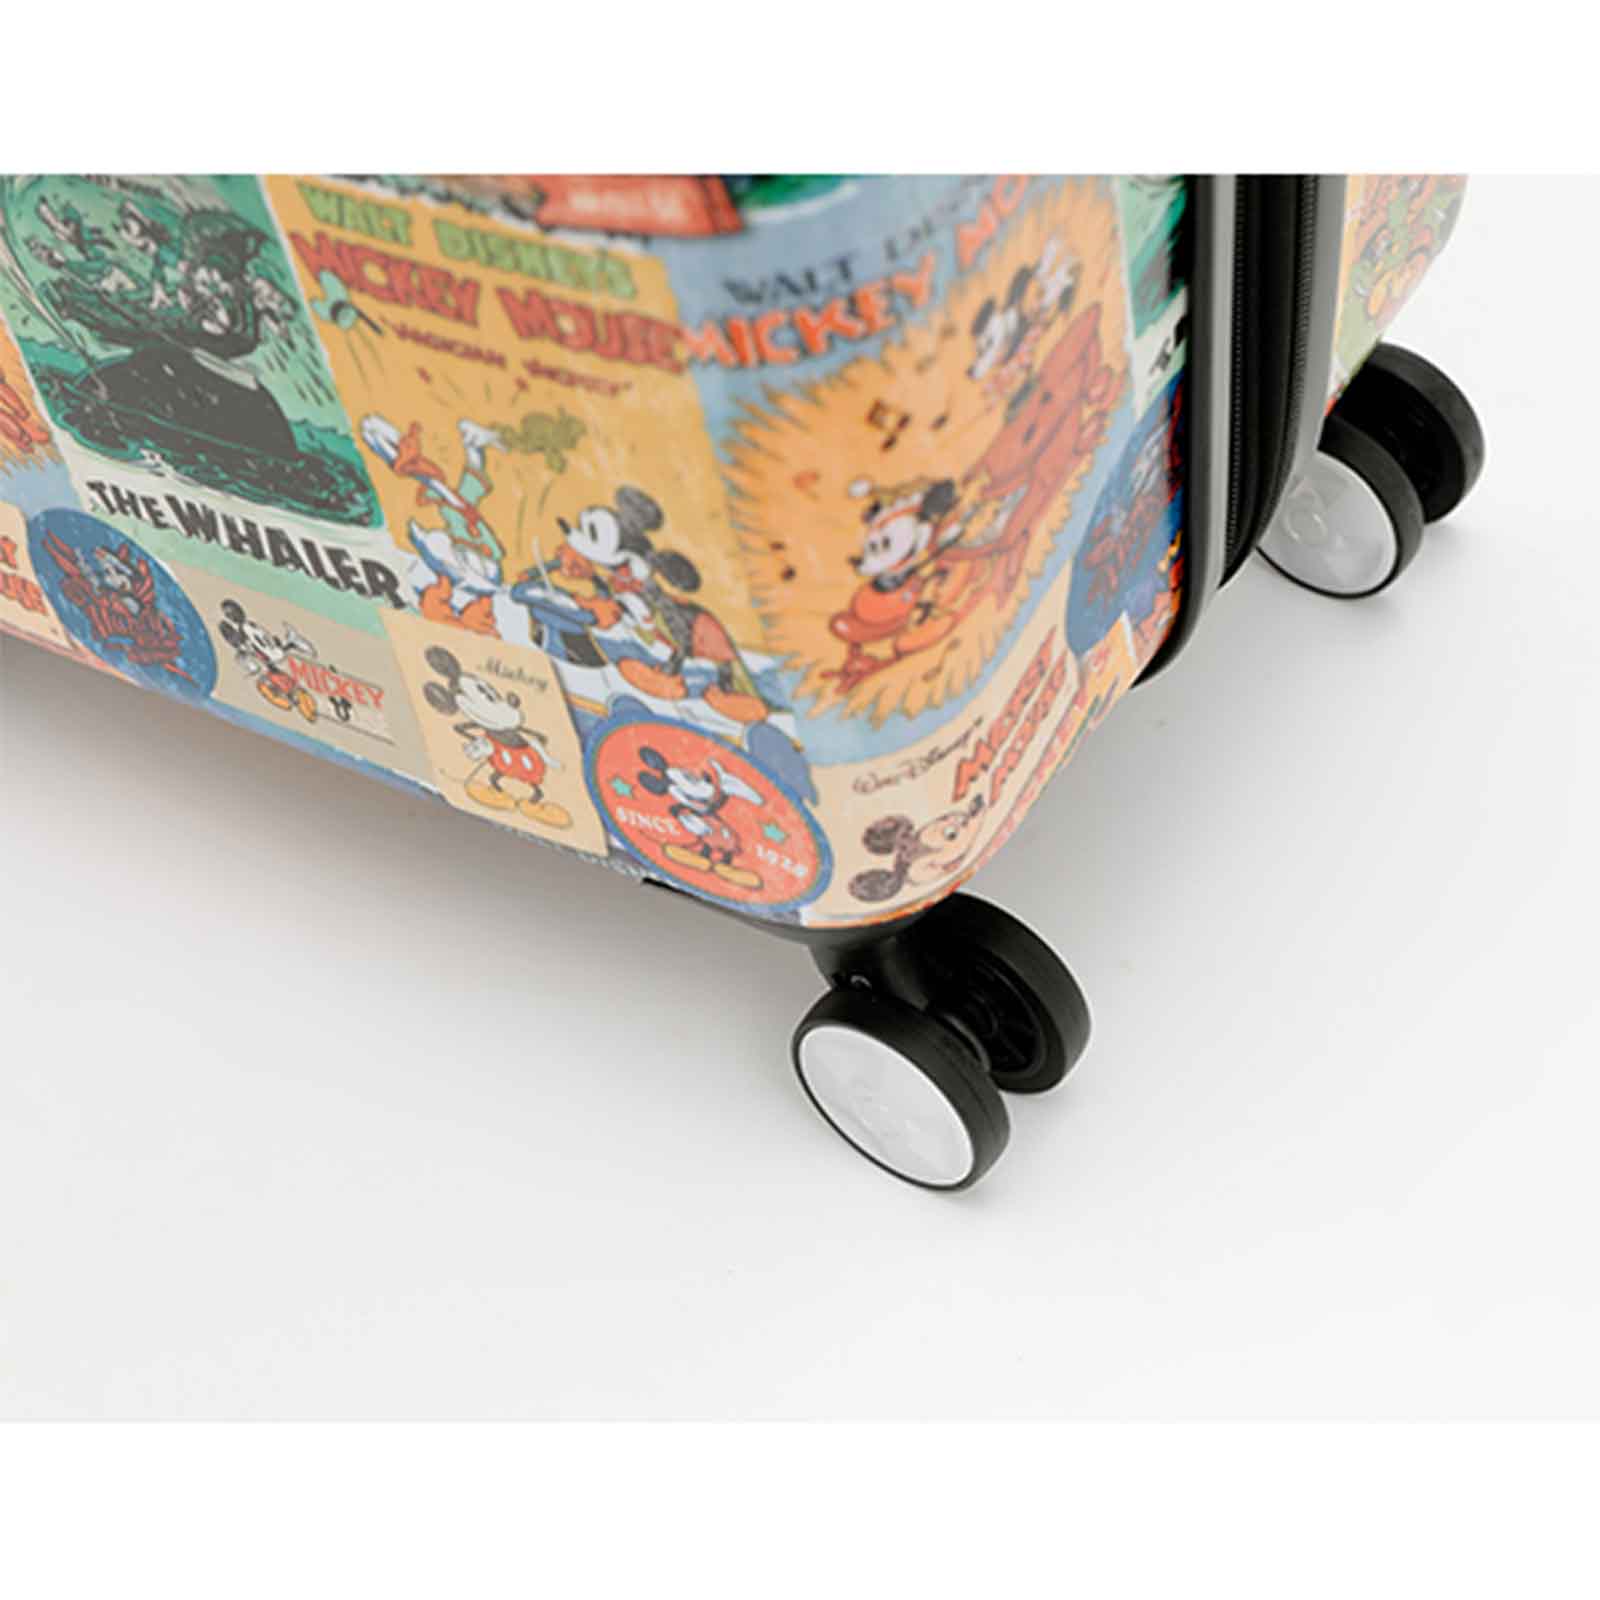 Disney Mickey Comic 20 Inch Carry-On Suitcase